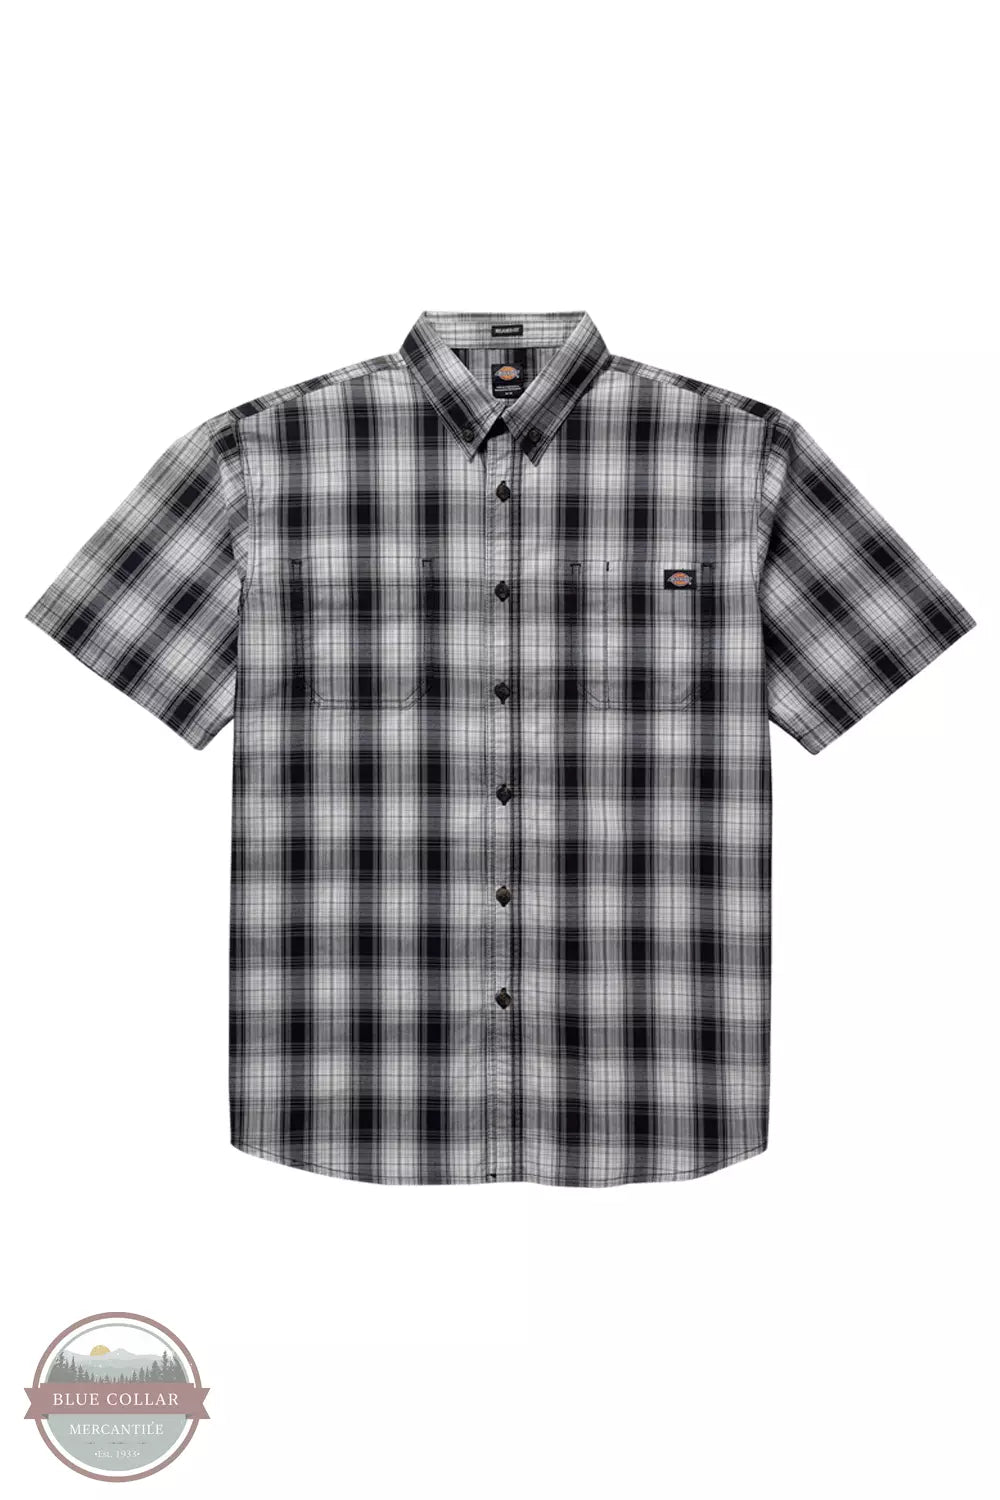 Dickies WS551 Flex Short Sleeve Woven Plaid Work Shirt Black Alloy Front View